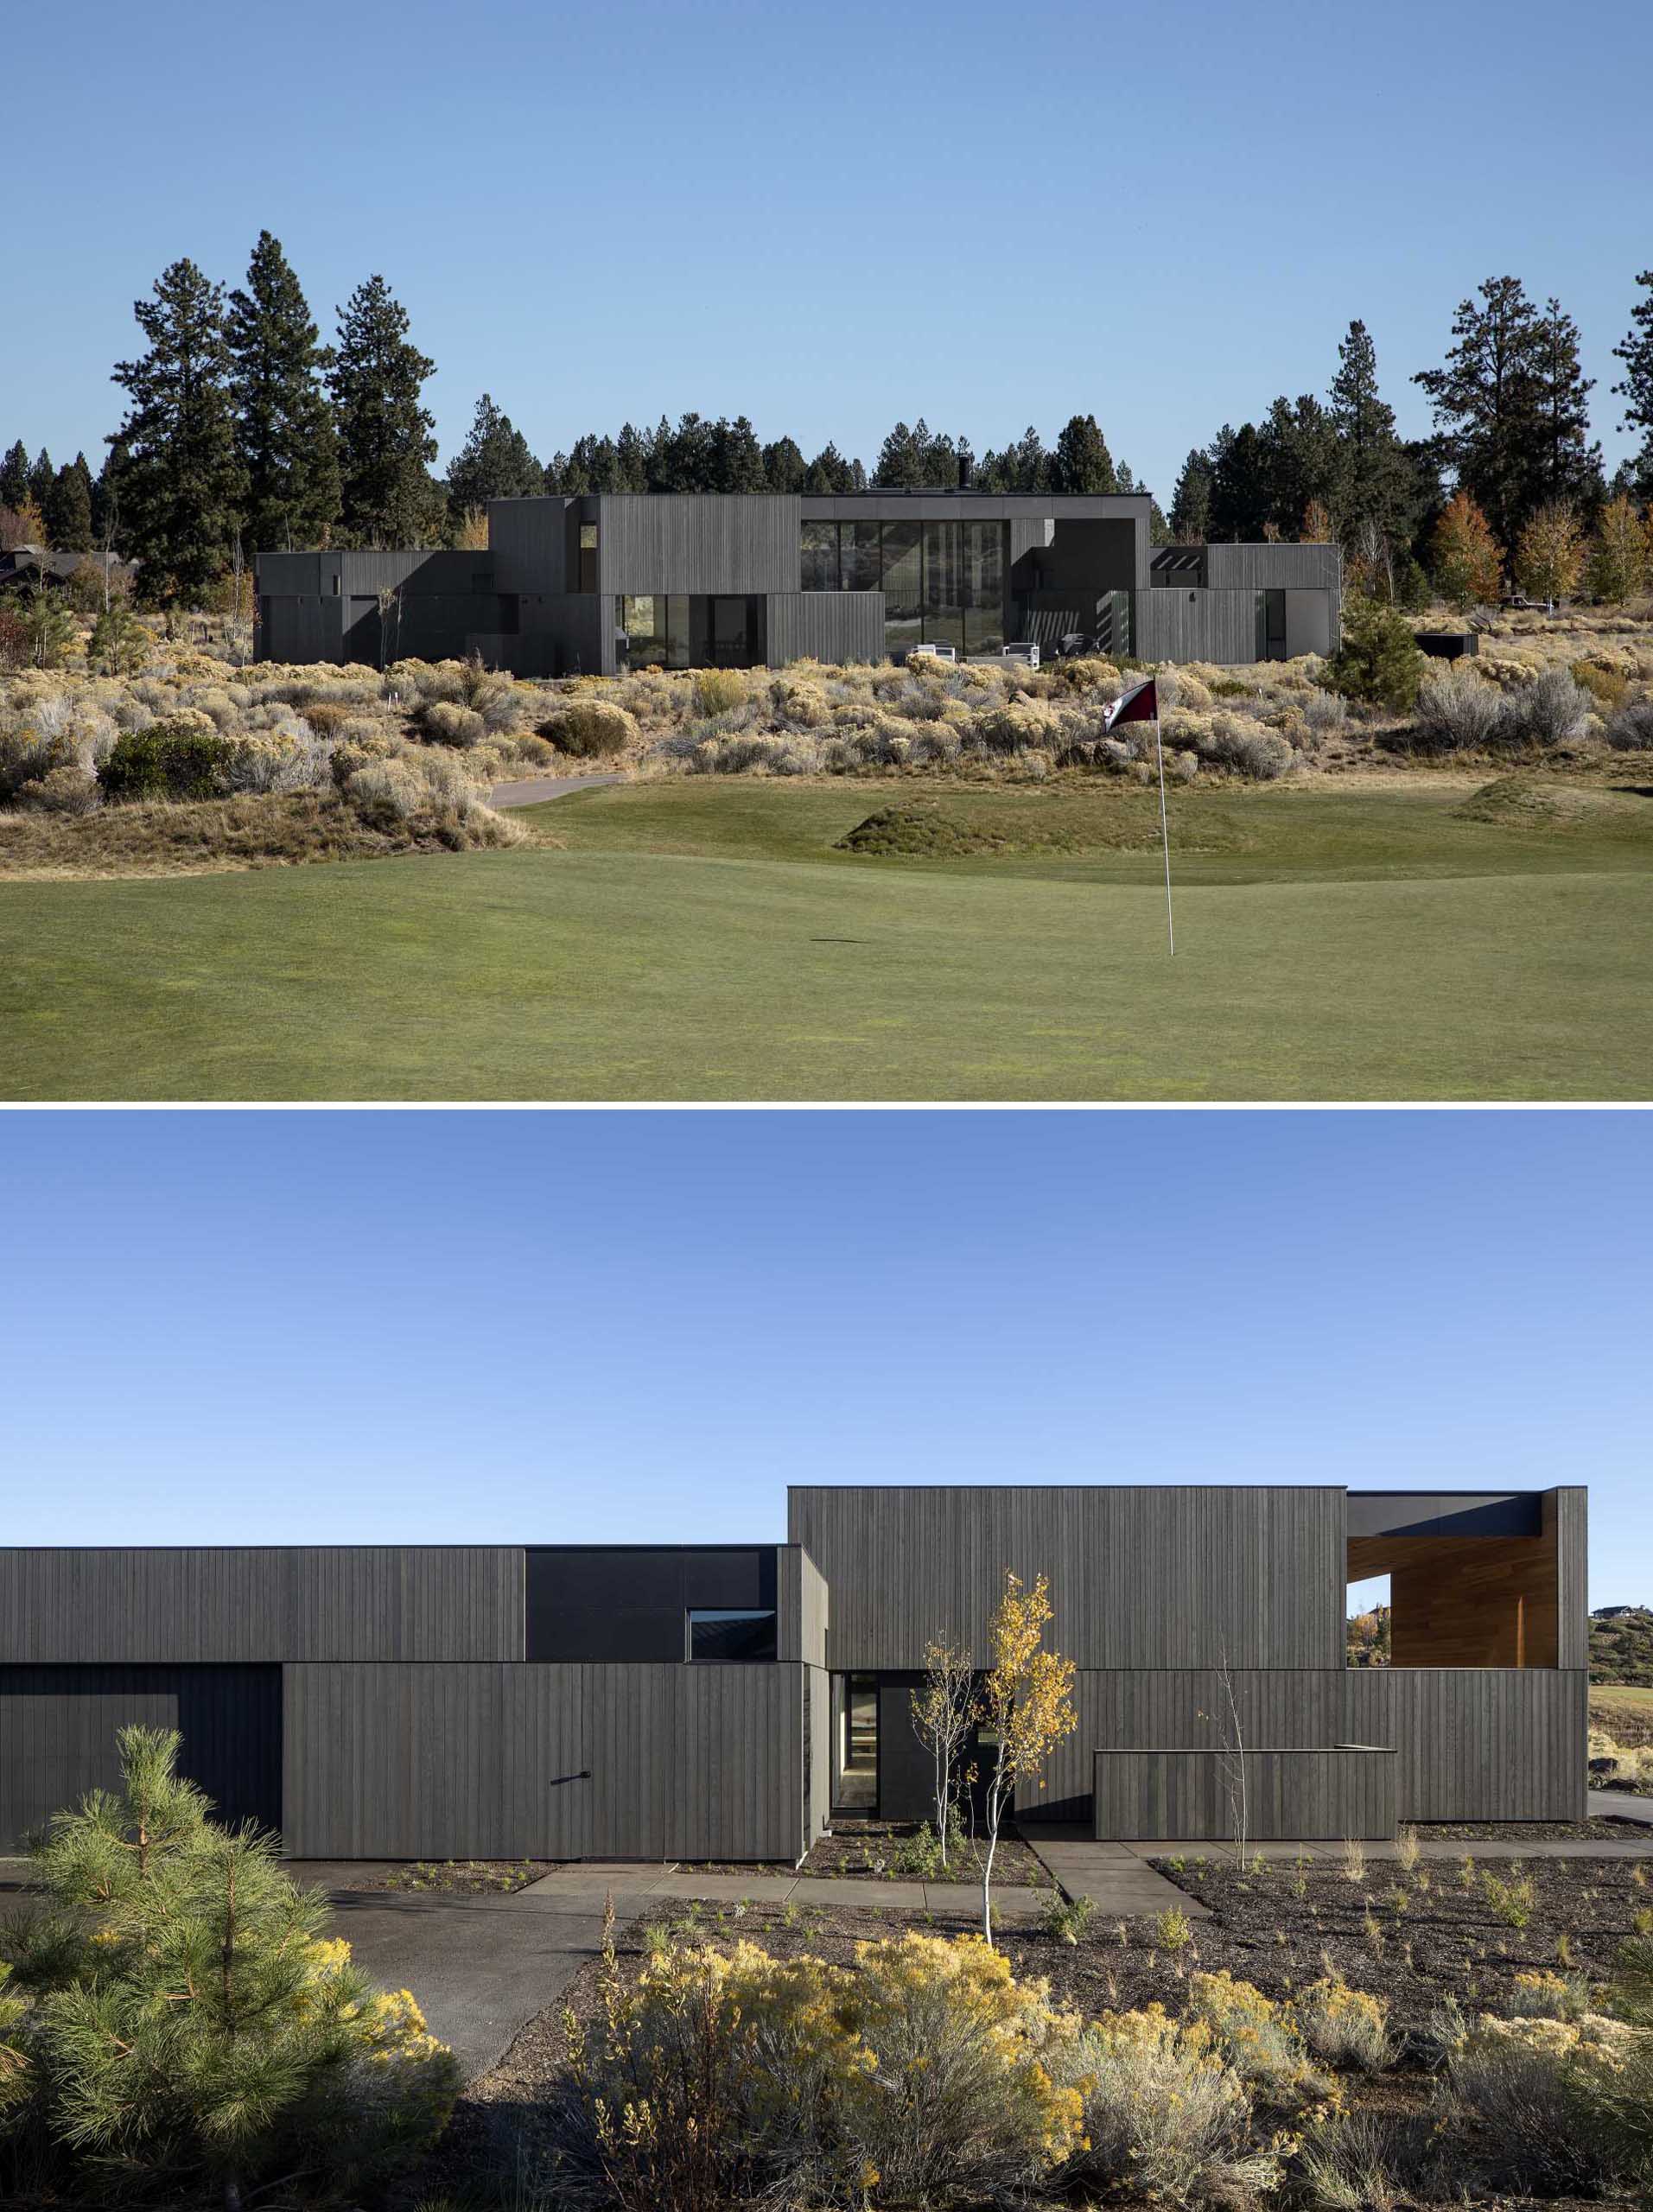 An exterior of cedar, steel, and glass give the High Desert Residence a bold presence in the shrubby, volcanic landscape that surrounds it.